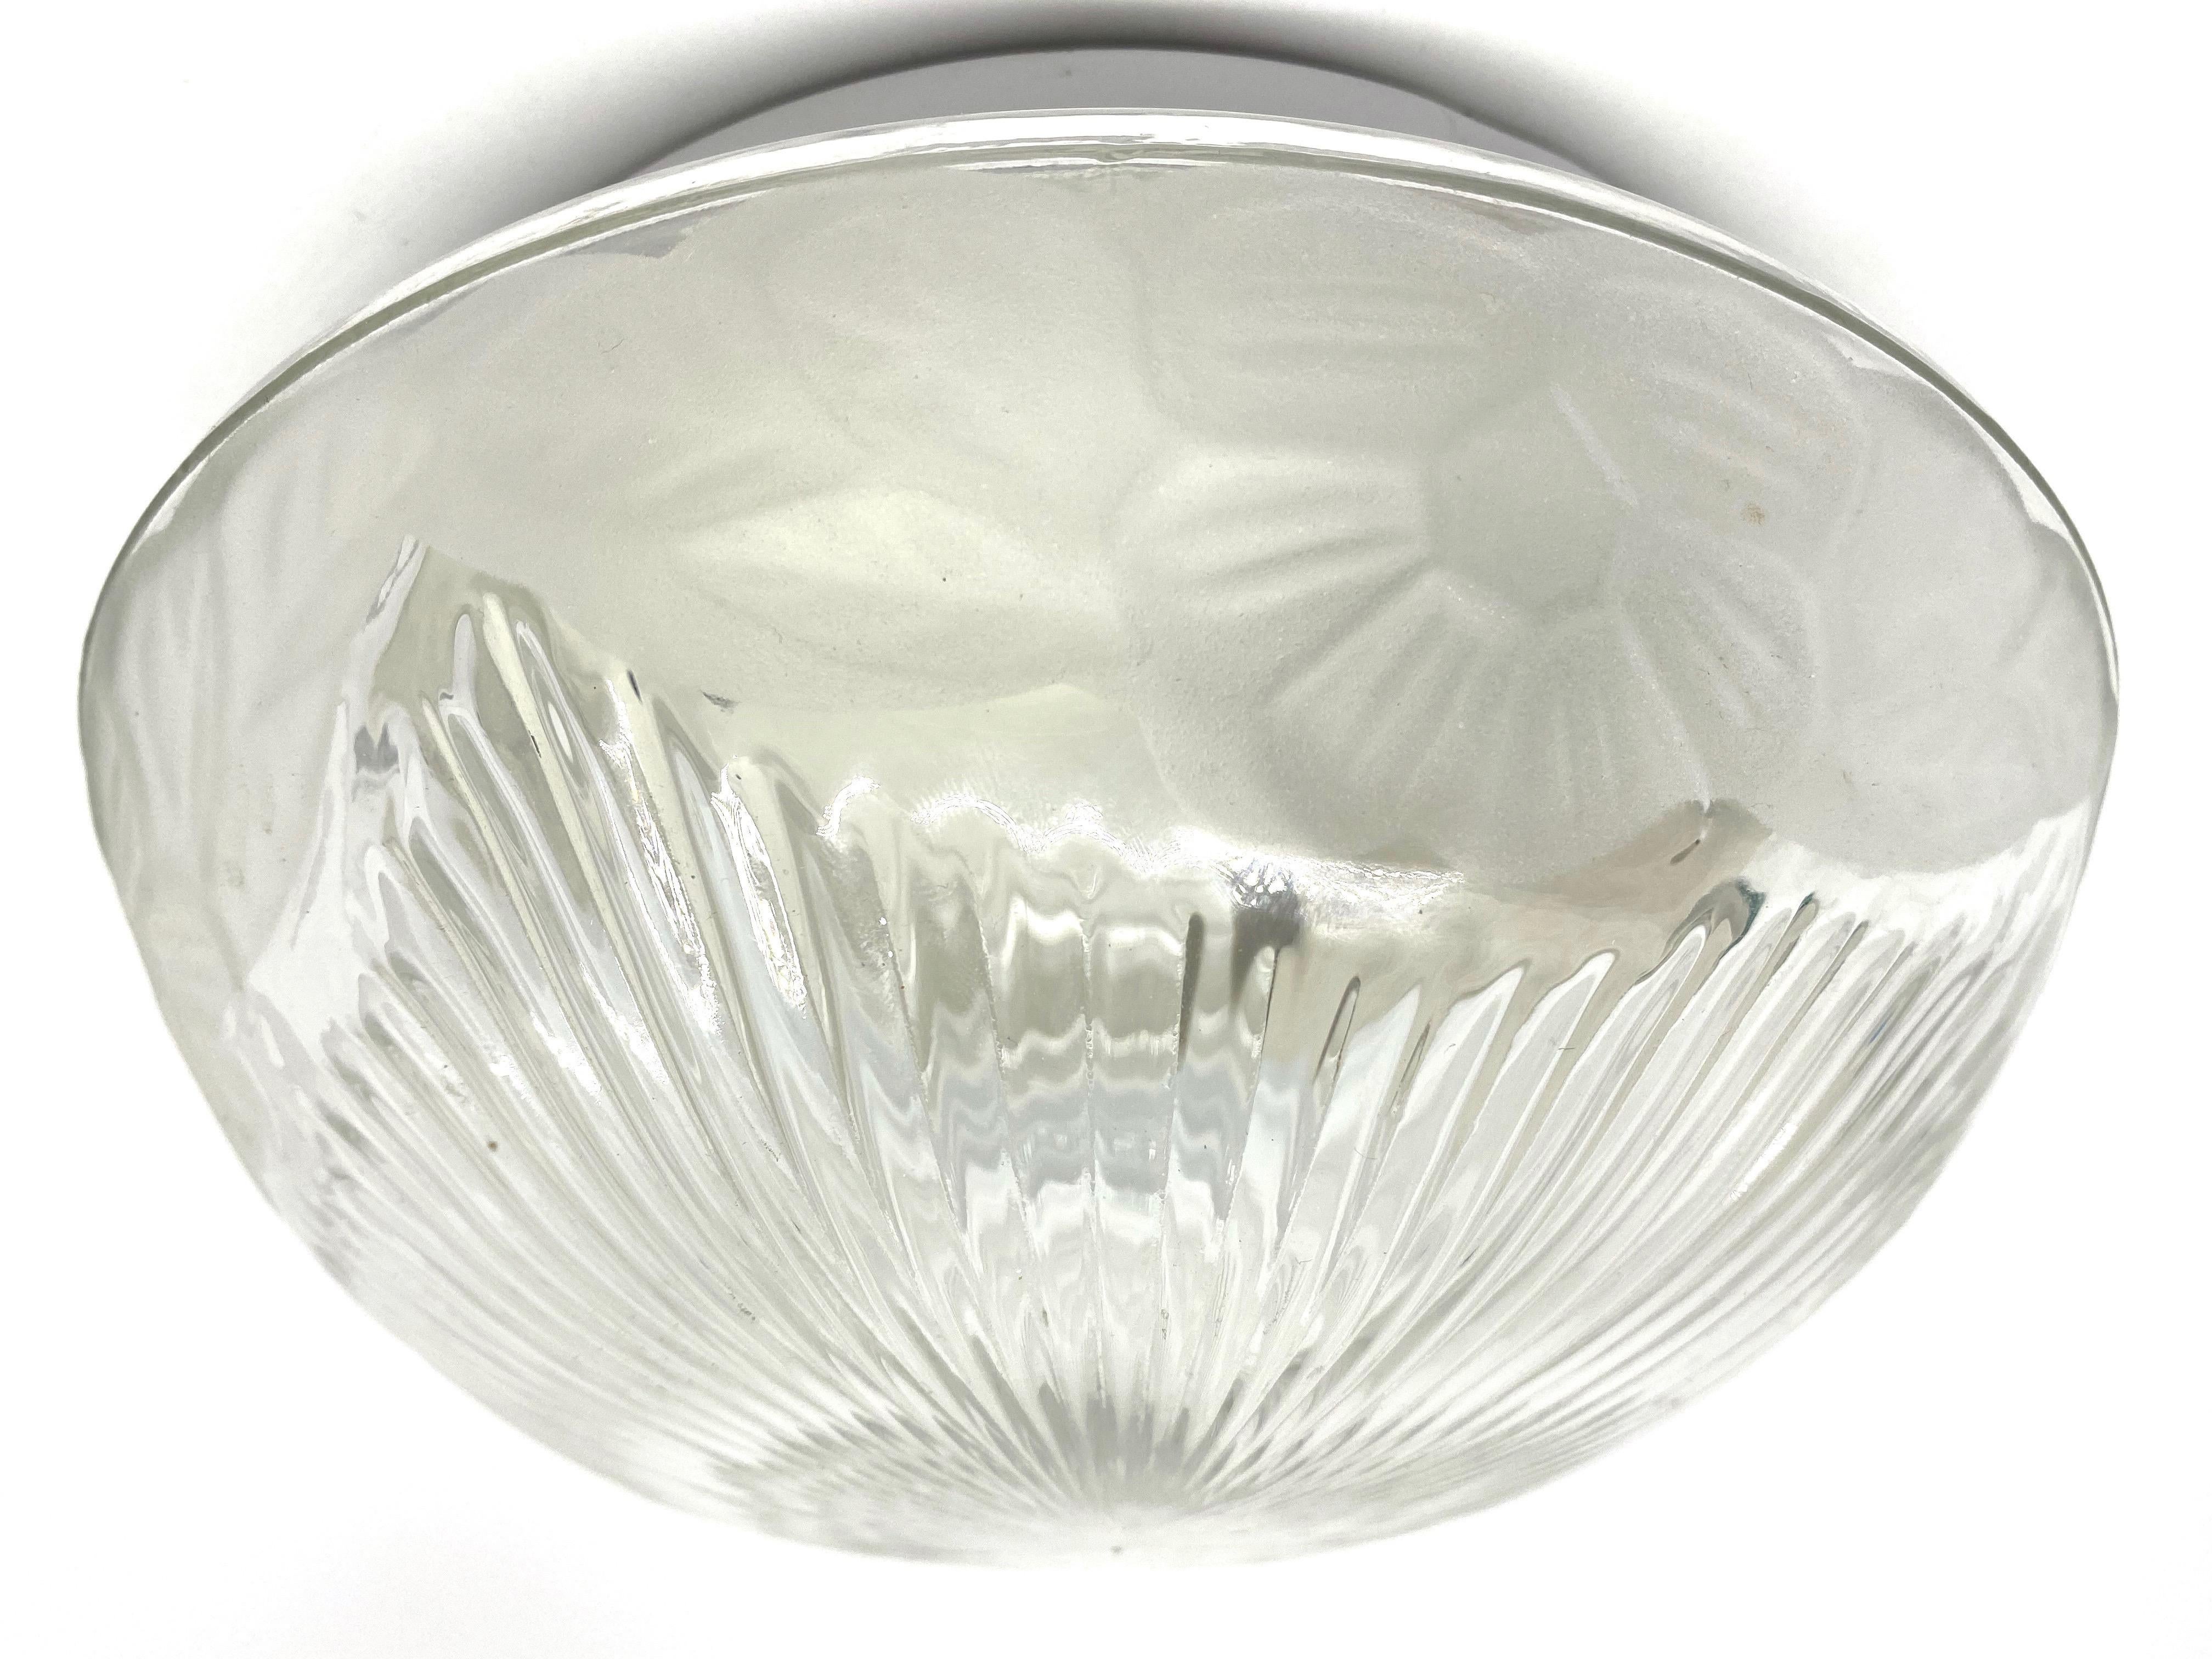 A beautiful flush mount by a German Lighting manufactory. Gorgeous textured glass flush mount with metal fixture. The fixture requires one European E27 Edison or medium bulb up to 60 watts.